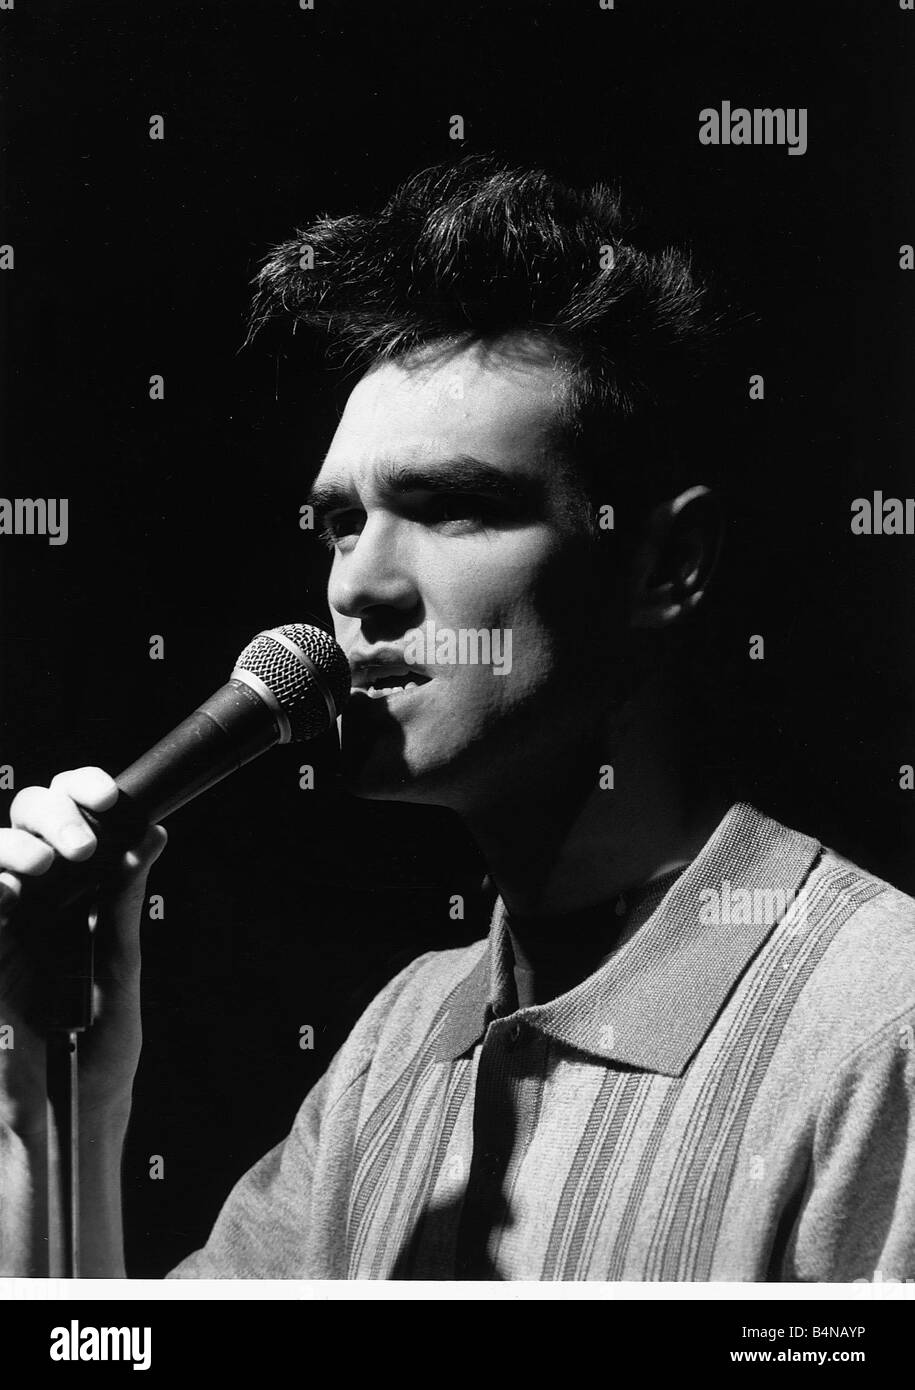 The Smiths pop singer Morrissey singing on stage 1984 Stock Photo